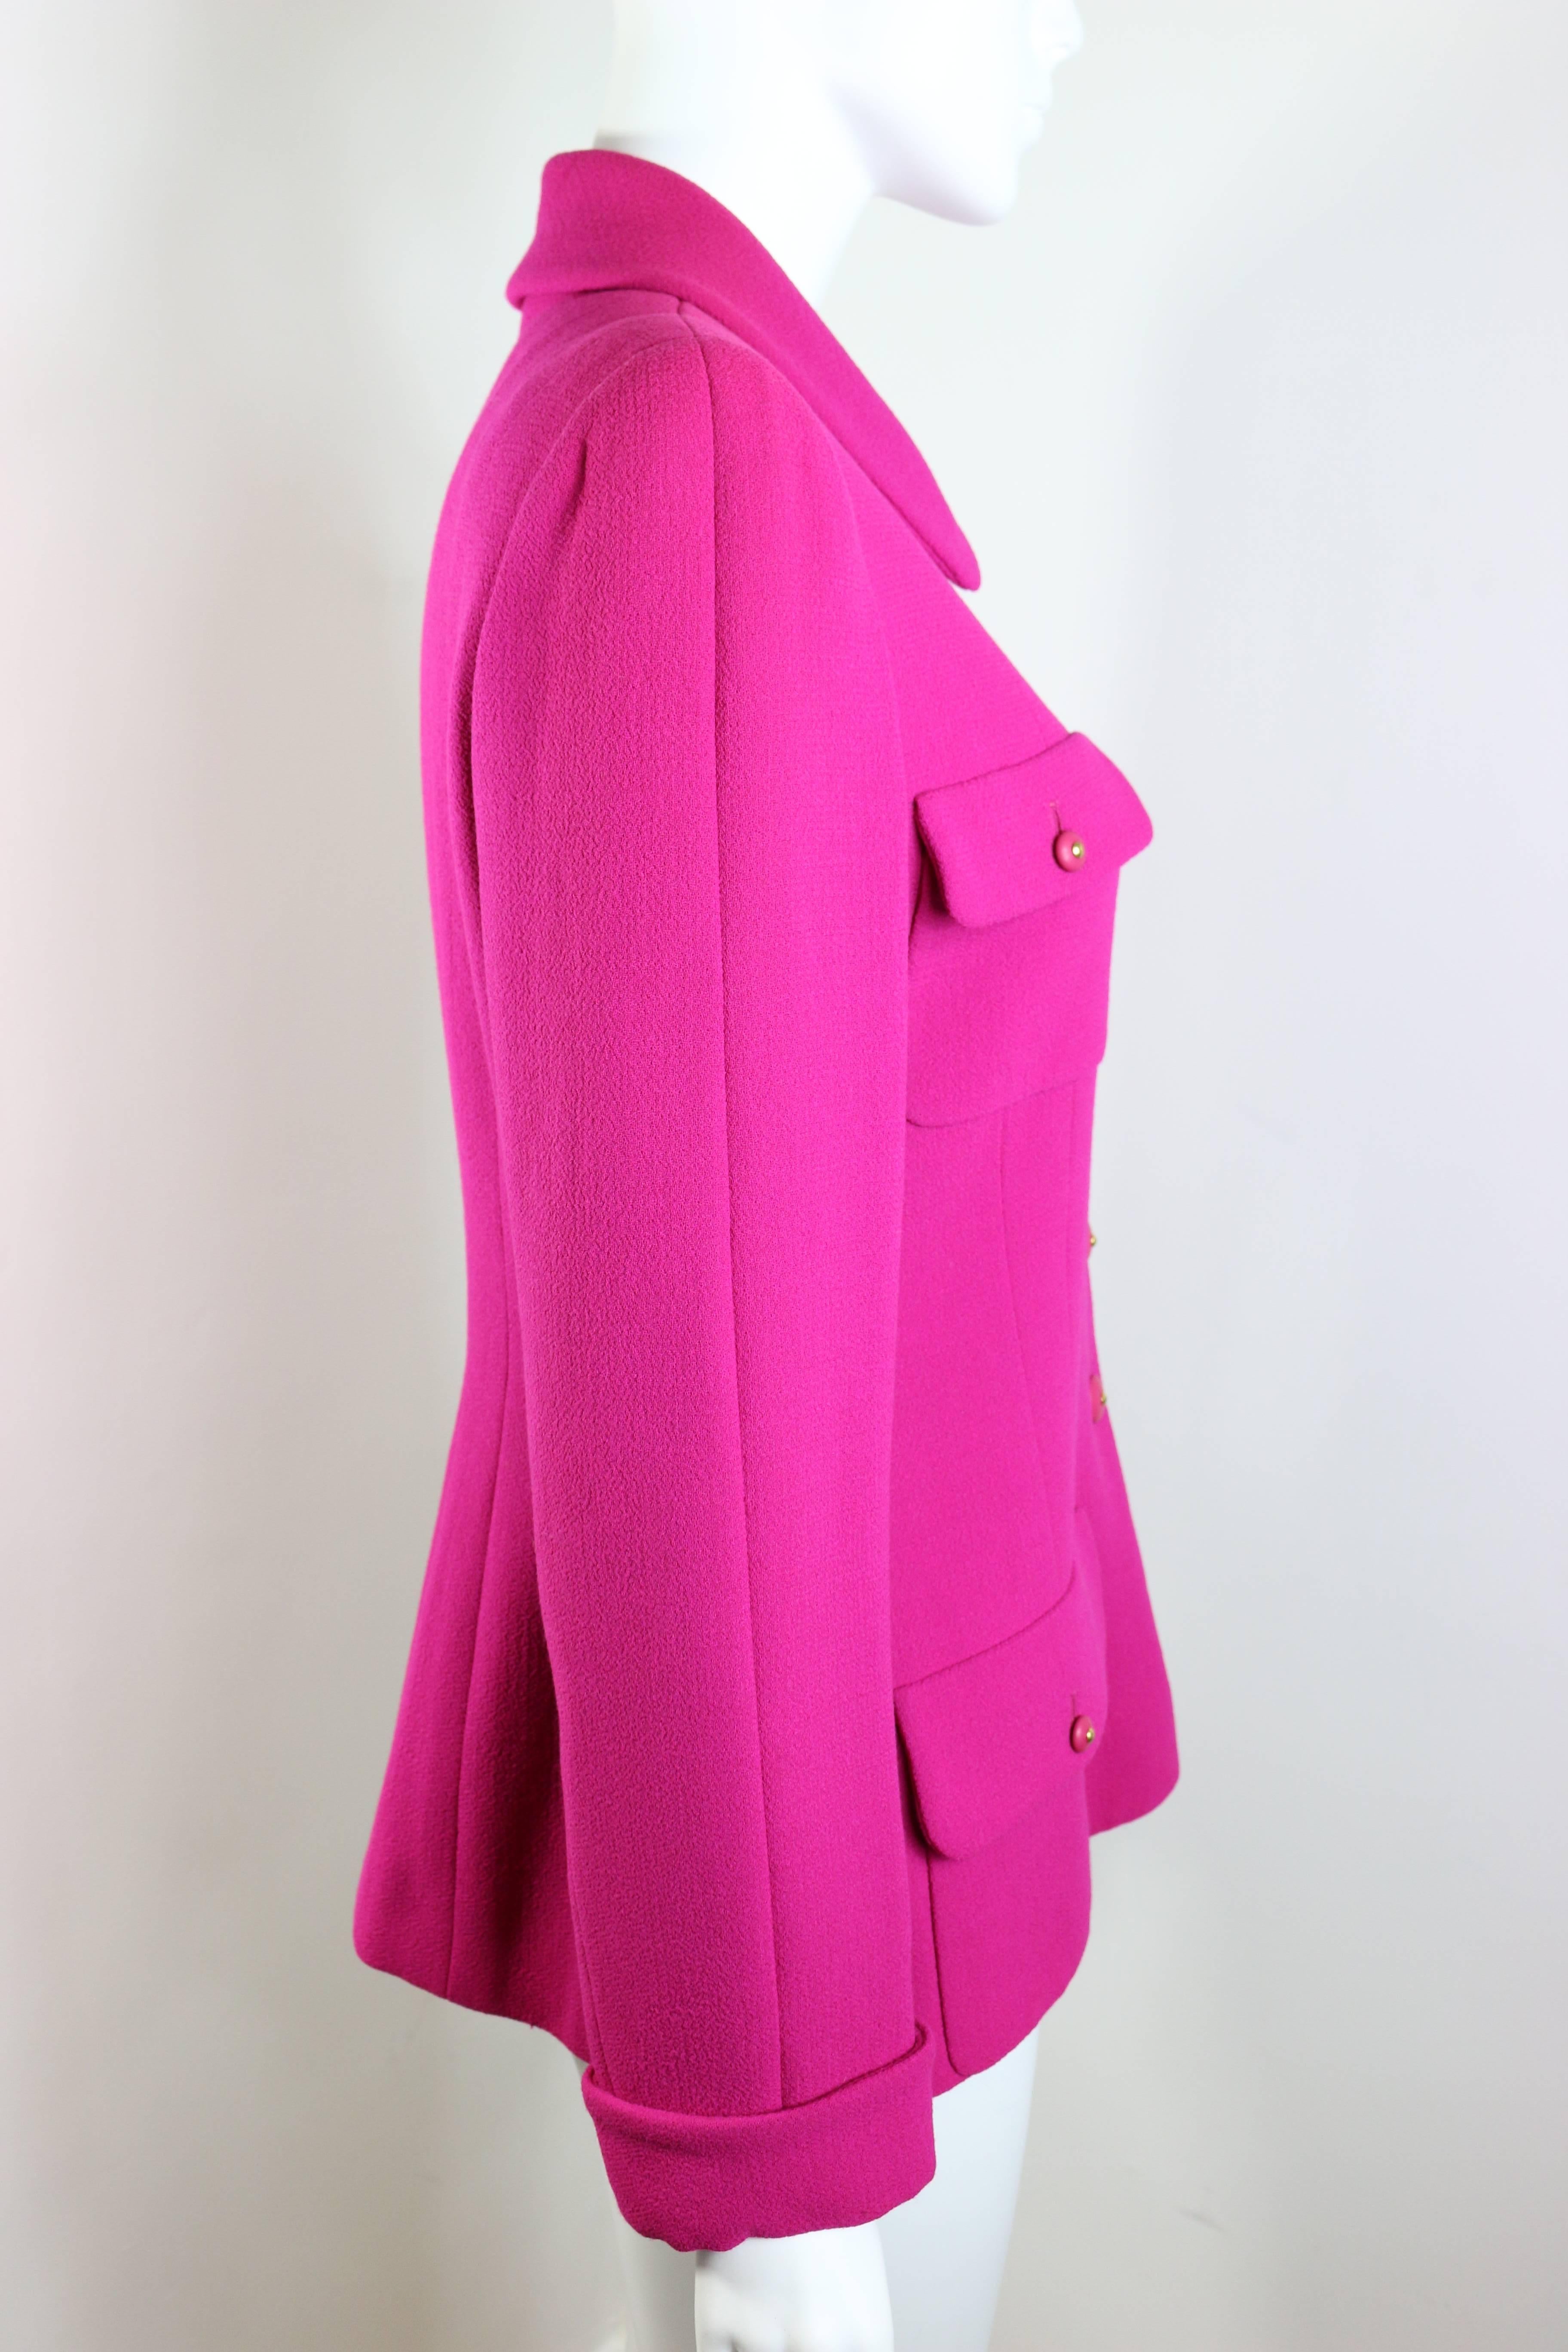 Chanel Fuchsia Wool Jacket  In New Condition For Sale In Sheung Wan, HK